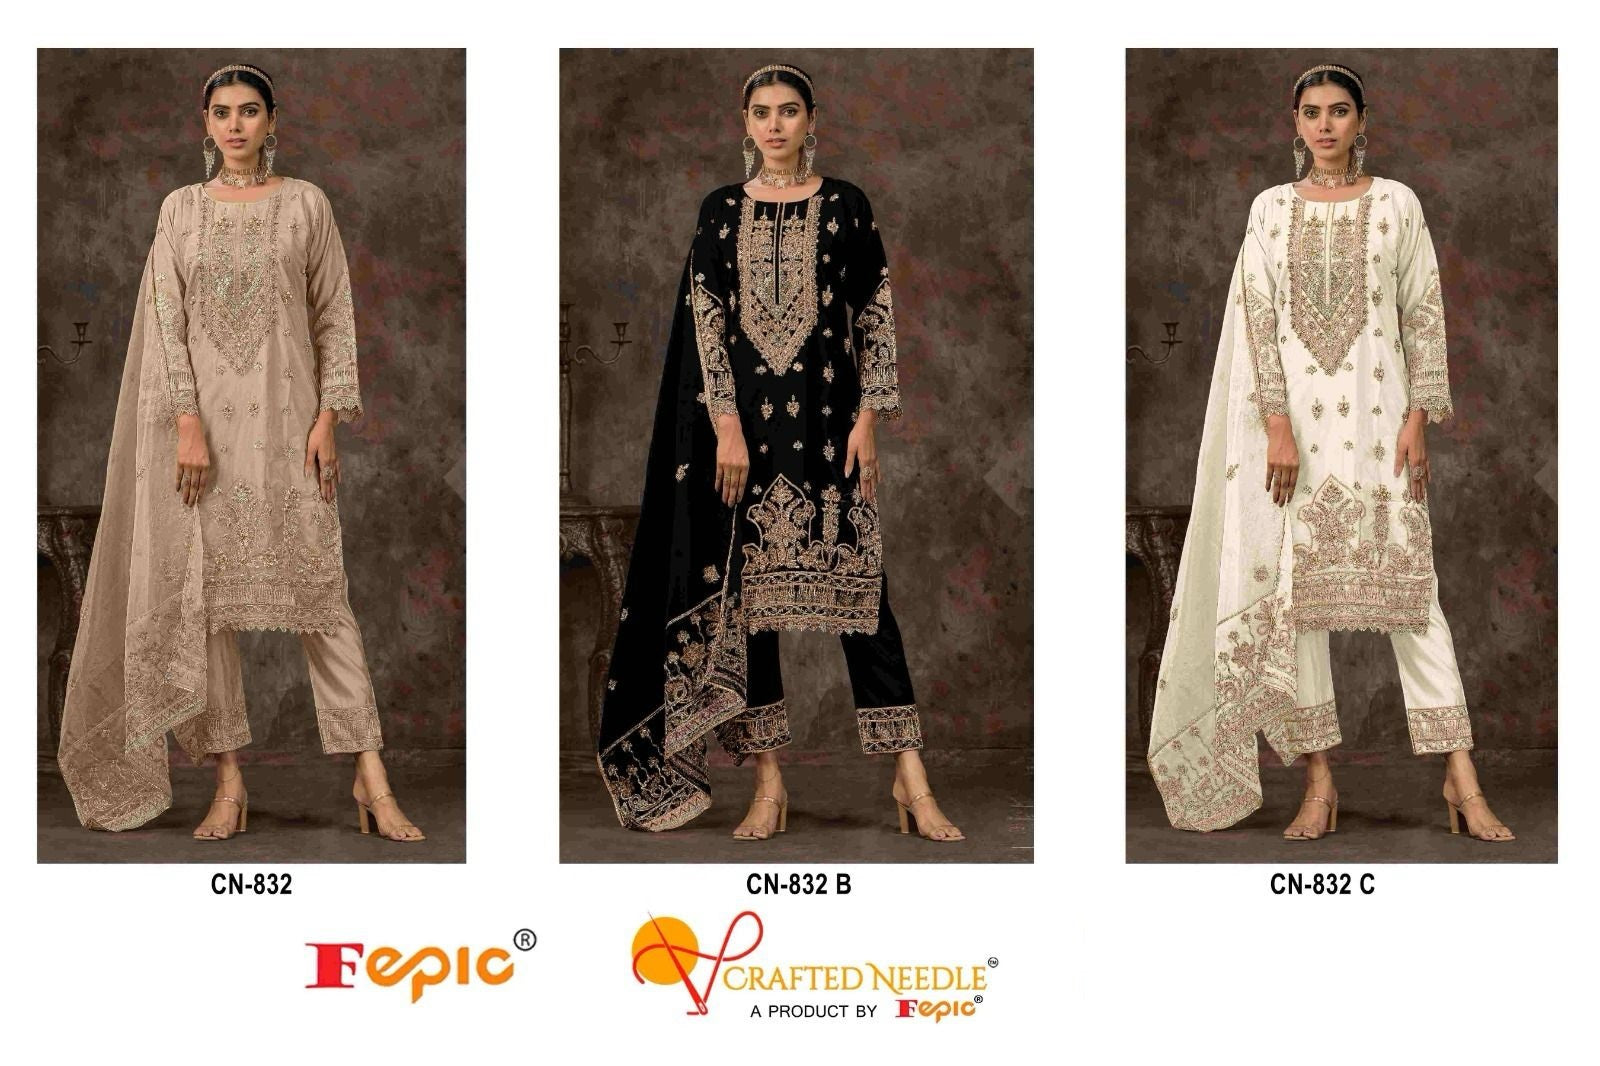 Cn-832 Crafted Needle Organza Pakistani Readymade Suits